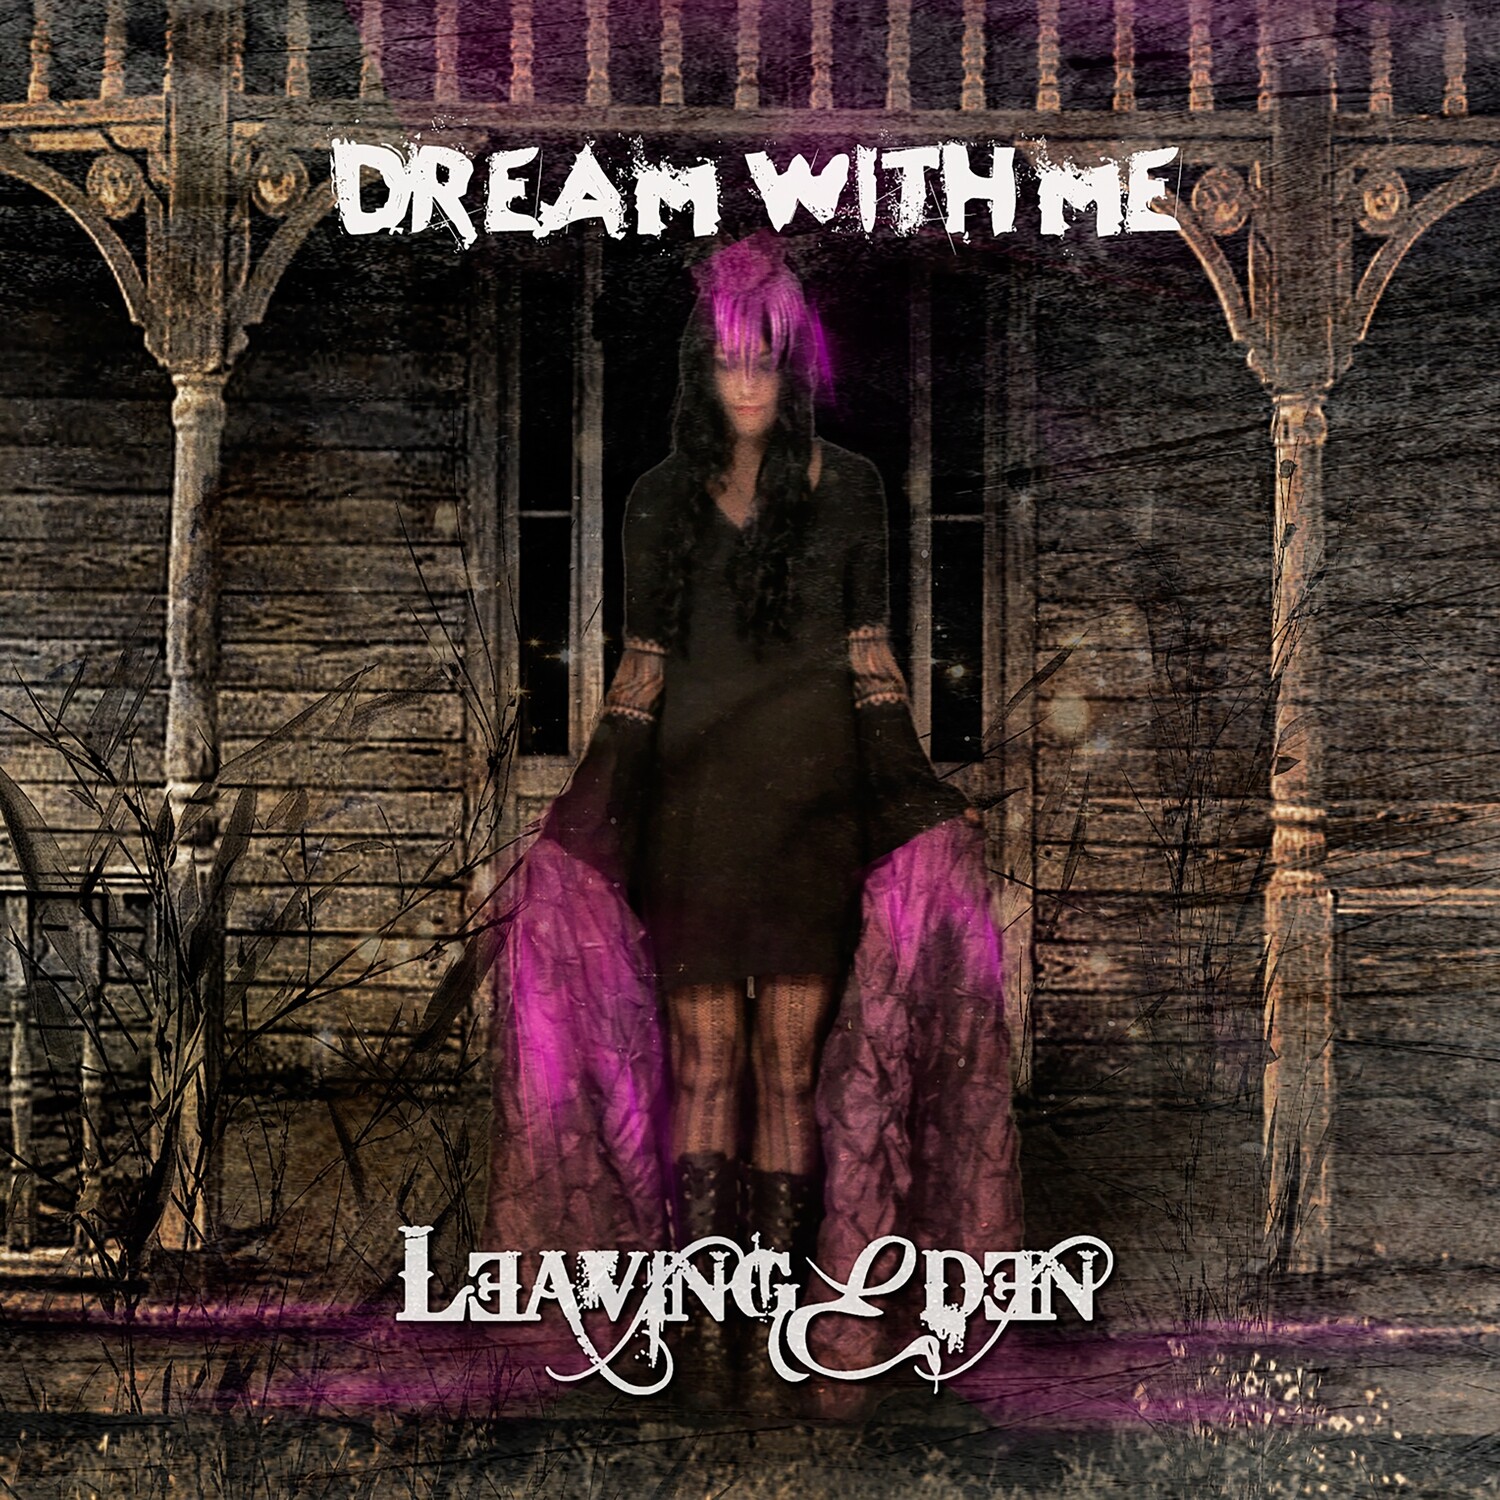 Dream With Me by Leaving Eden [CD]